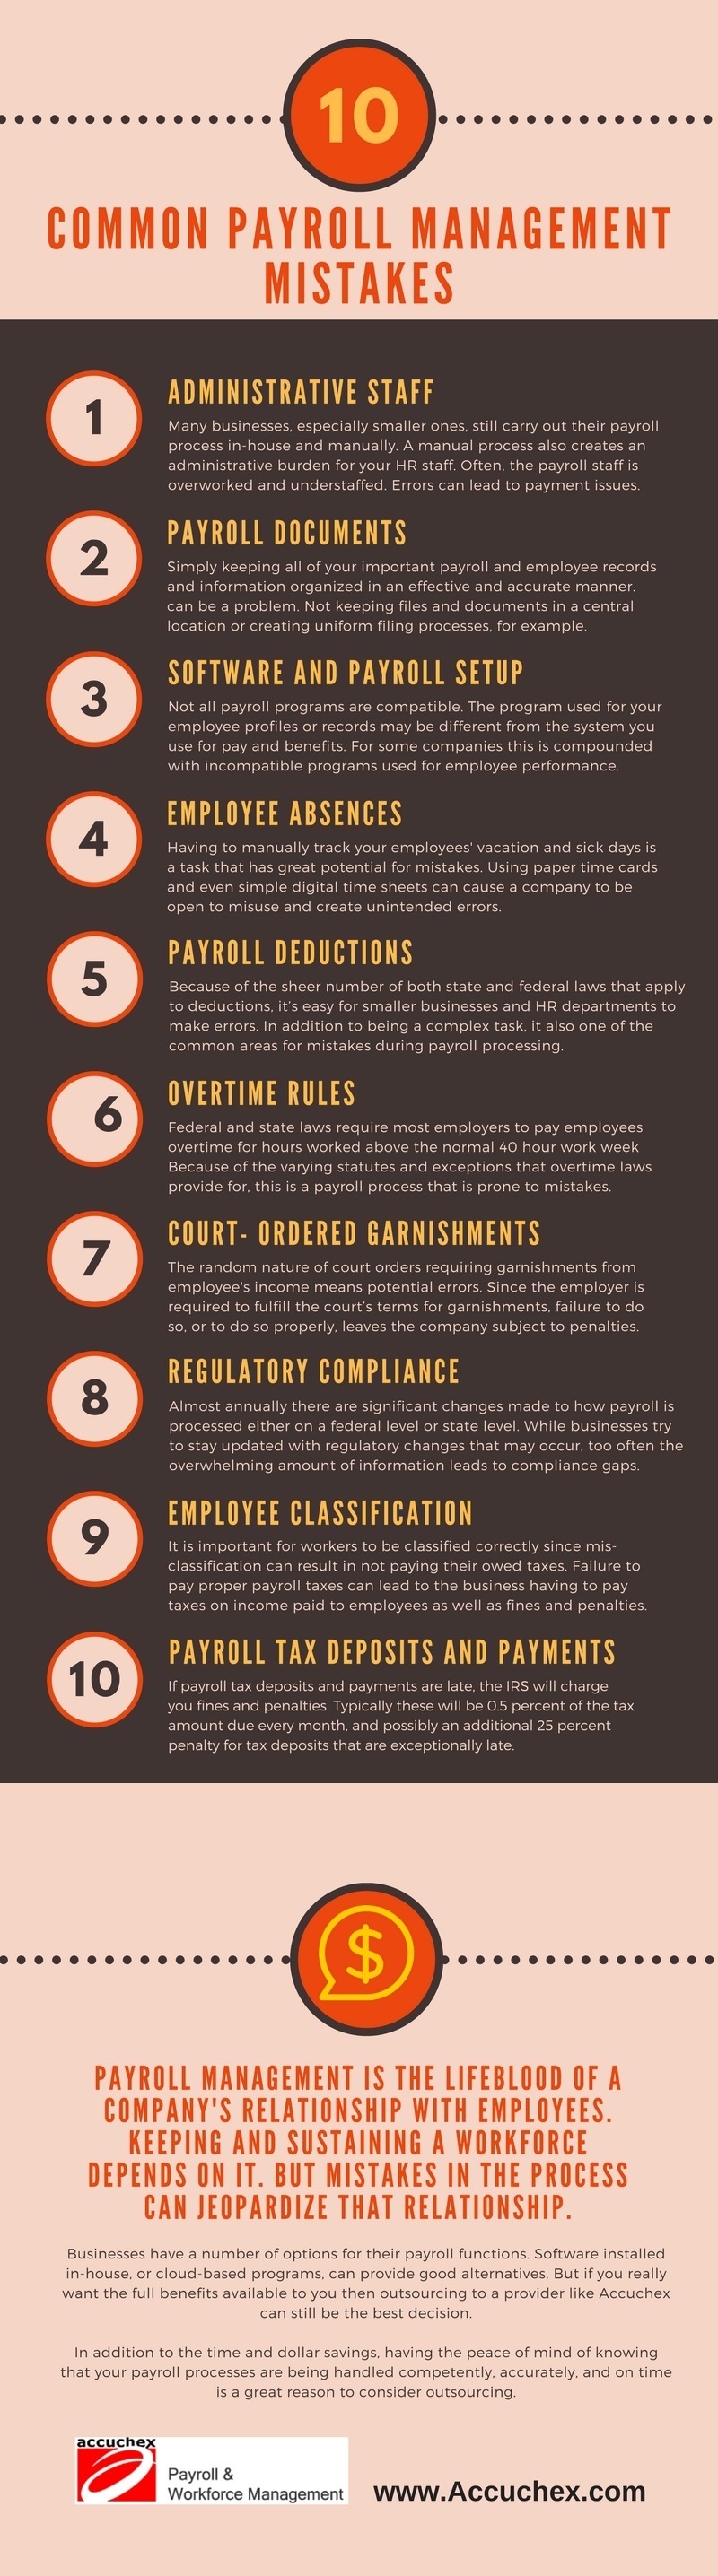 10-common-payroll-management-mistakes.jpg